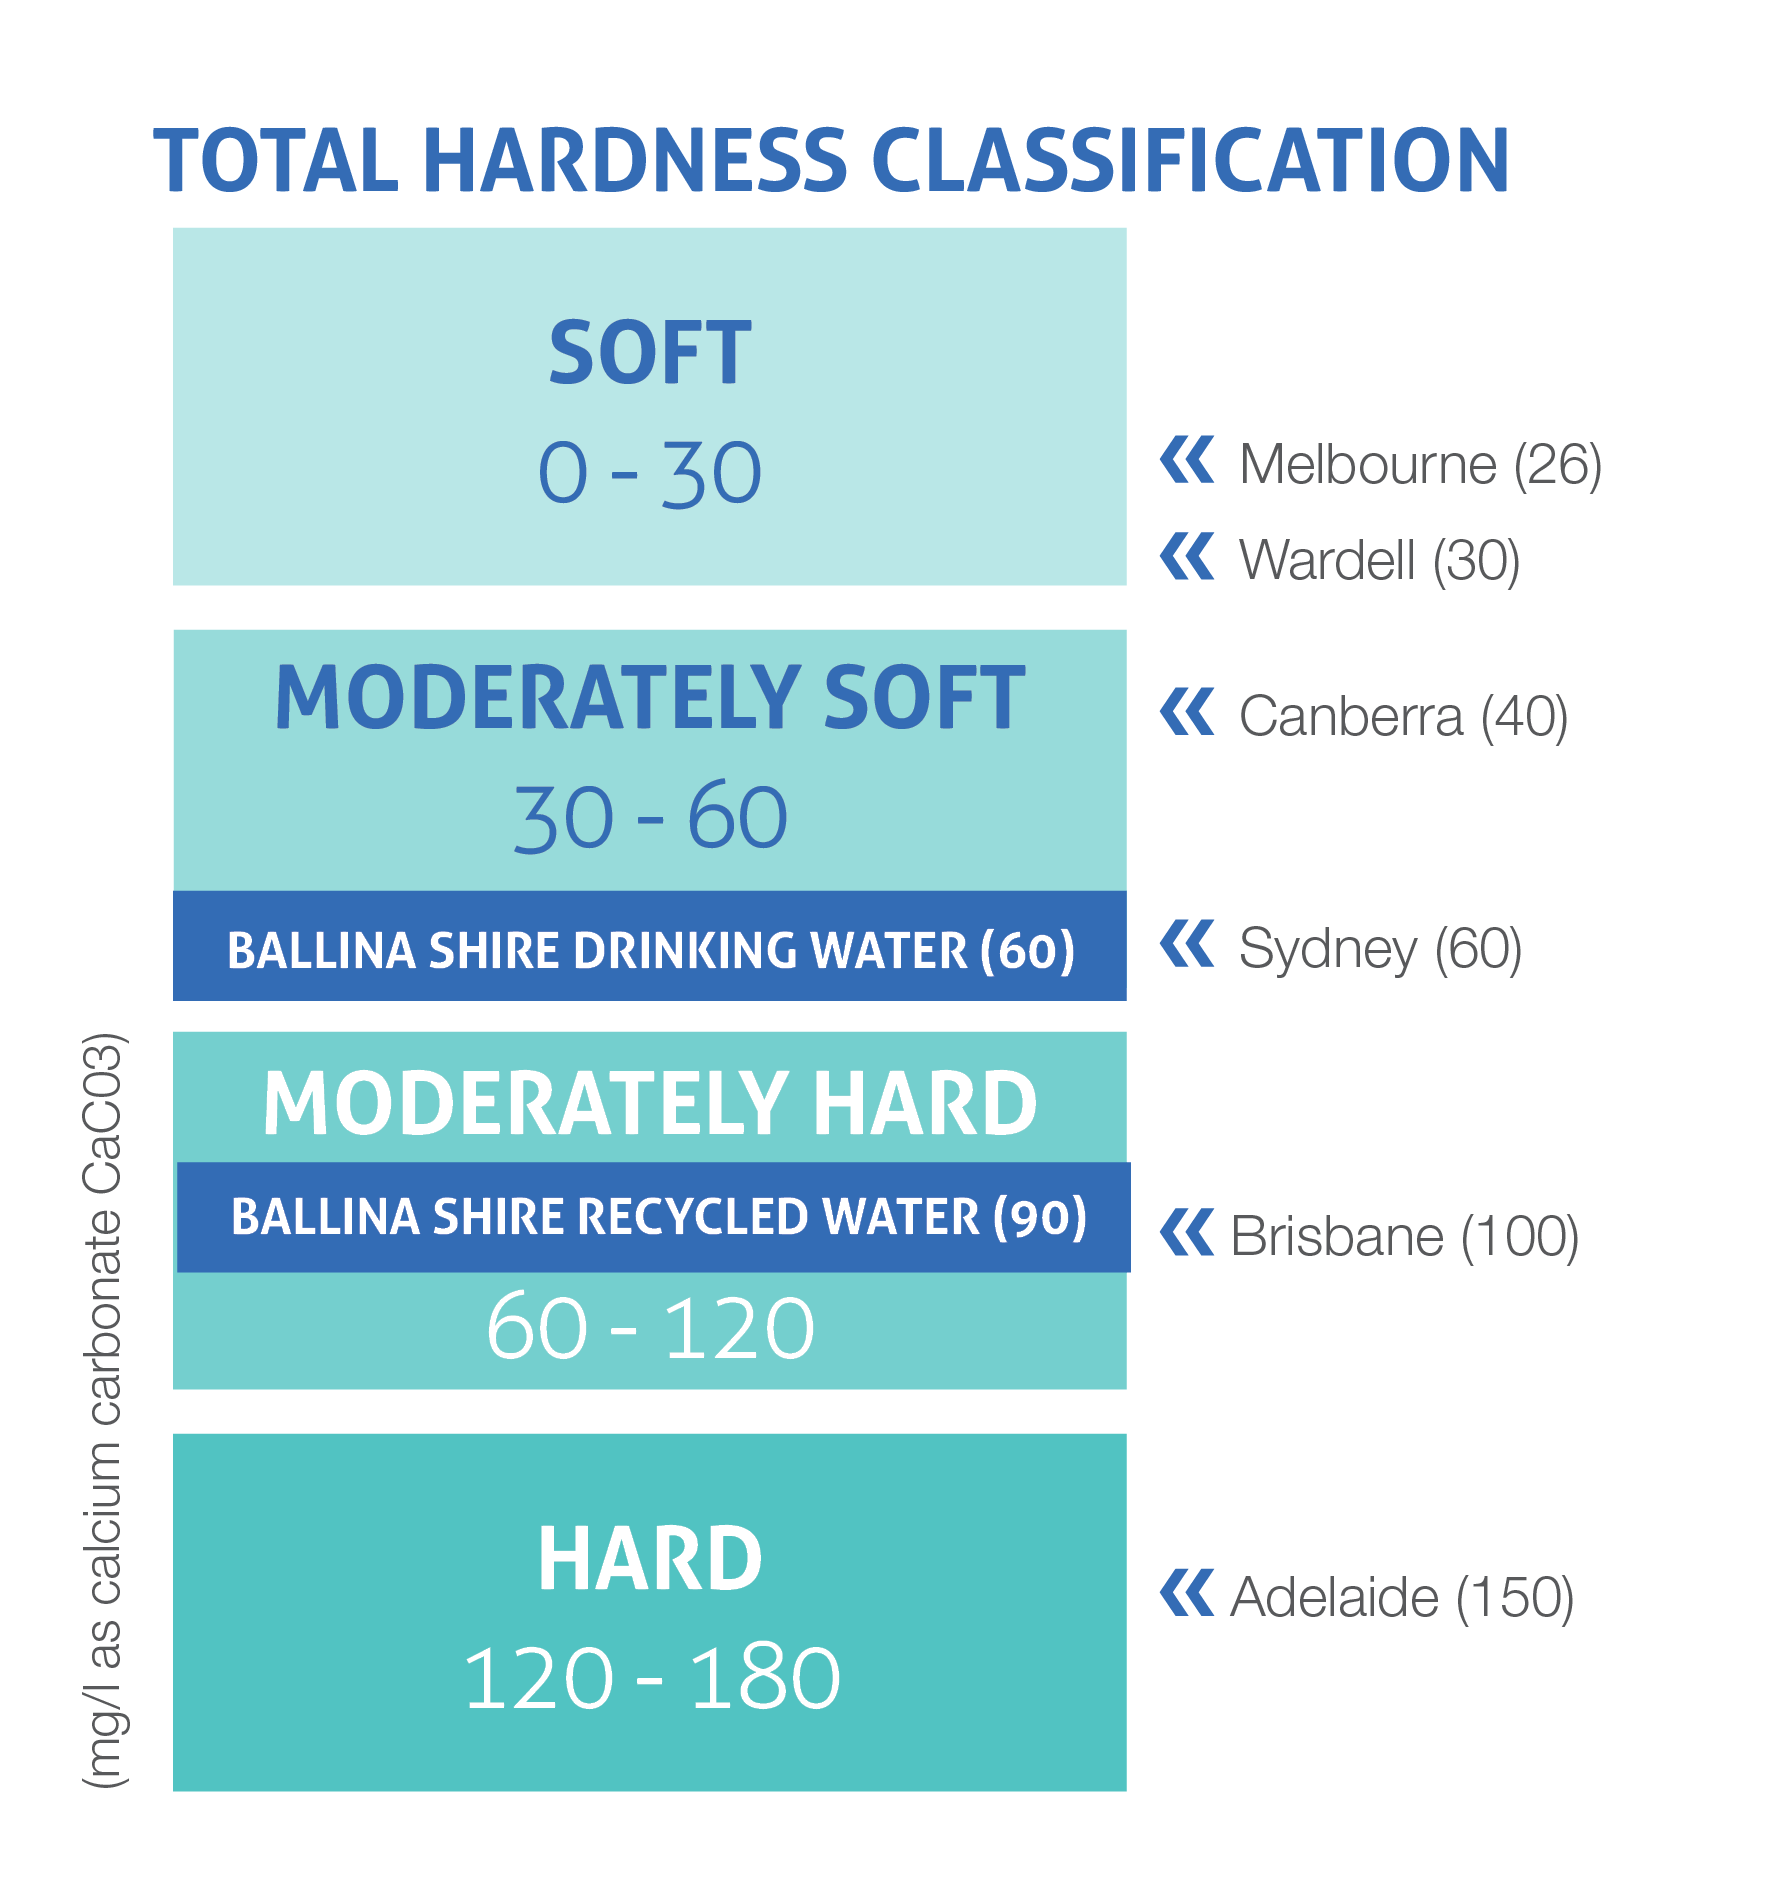 Water hardness classification image